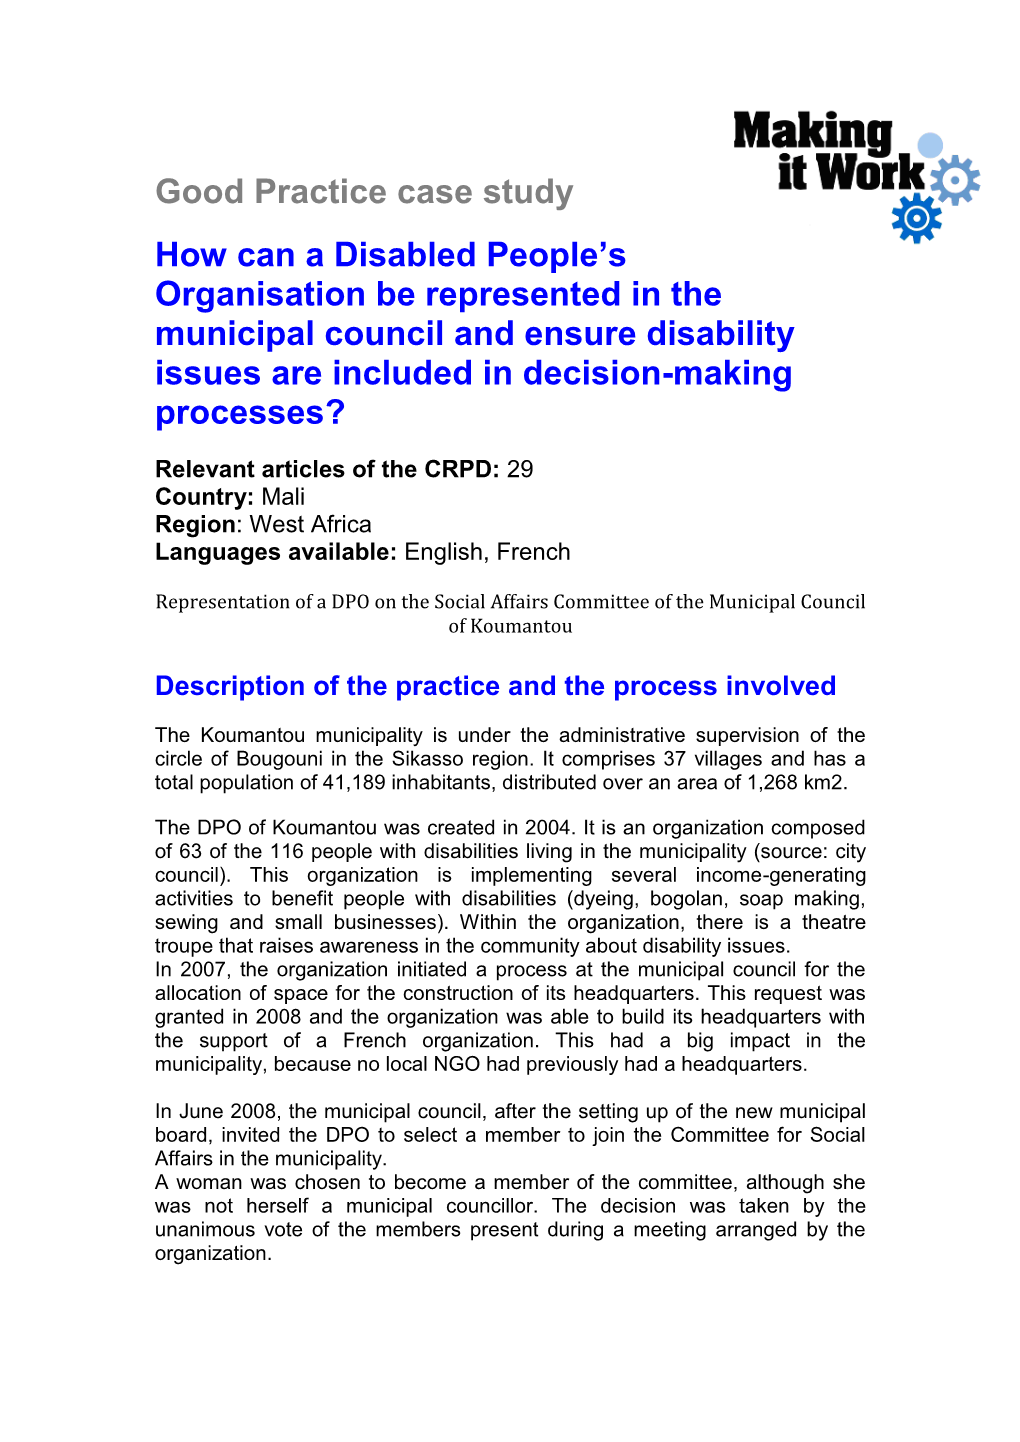 How Can a Disabled People's Organisation Be Represented in the Municipal Council and Ensure Disability Issues Are Included In